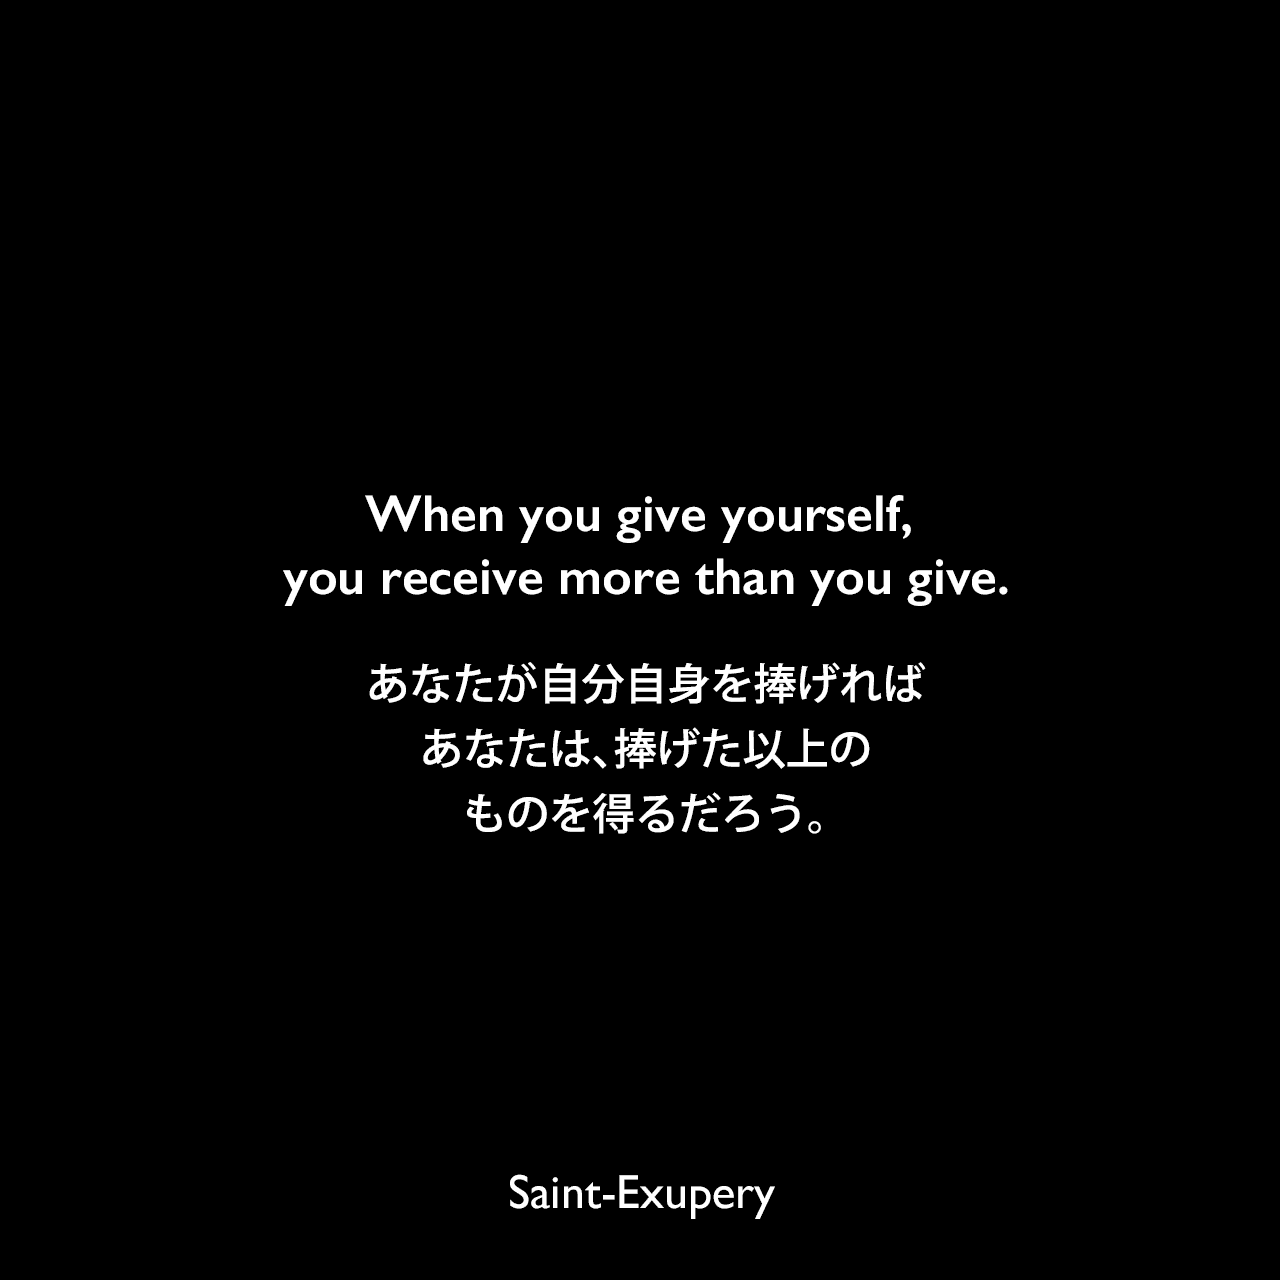 When you give yourself, you receive more than you give.あなたが自分自身を捧げれば、あなたは、捧げた以上のものを得るだろう。Saint-Exupery